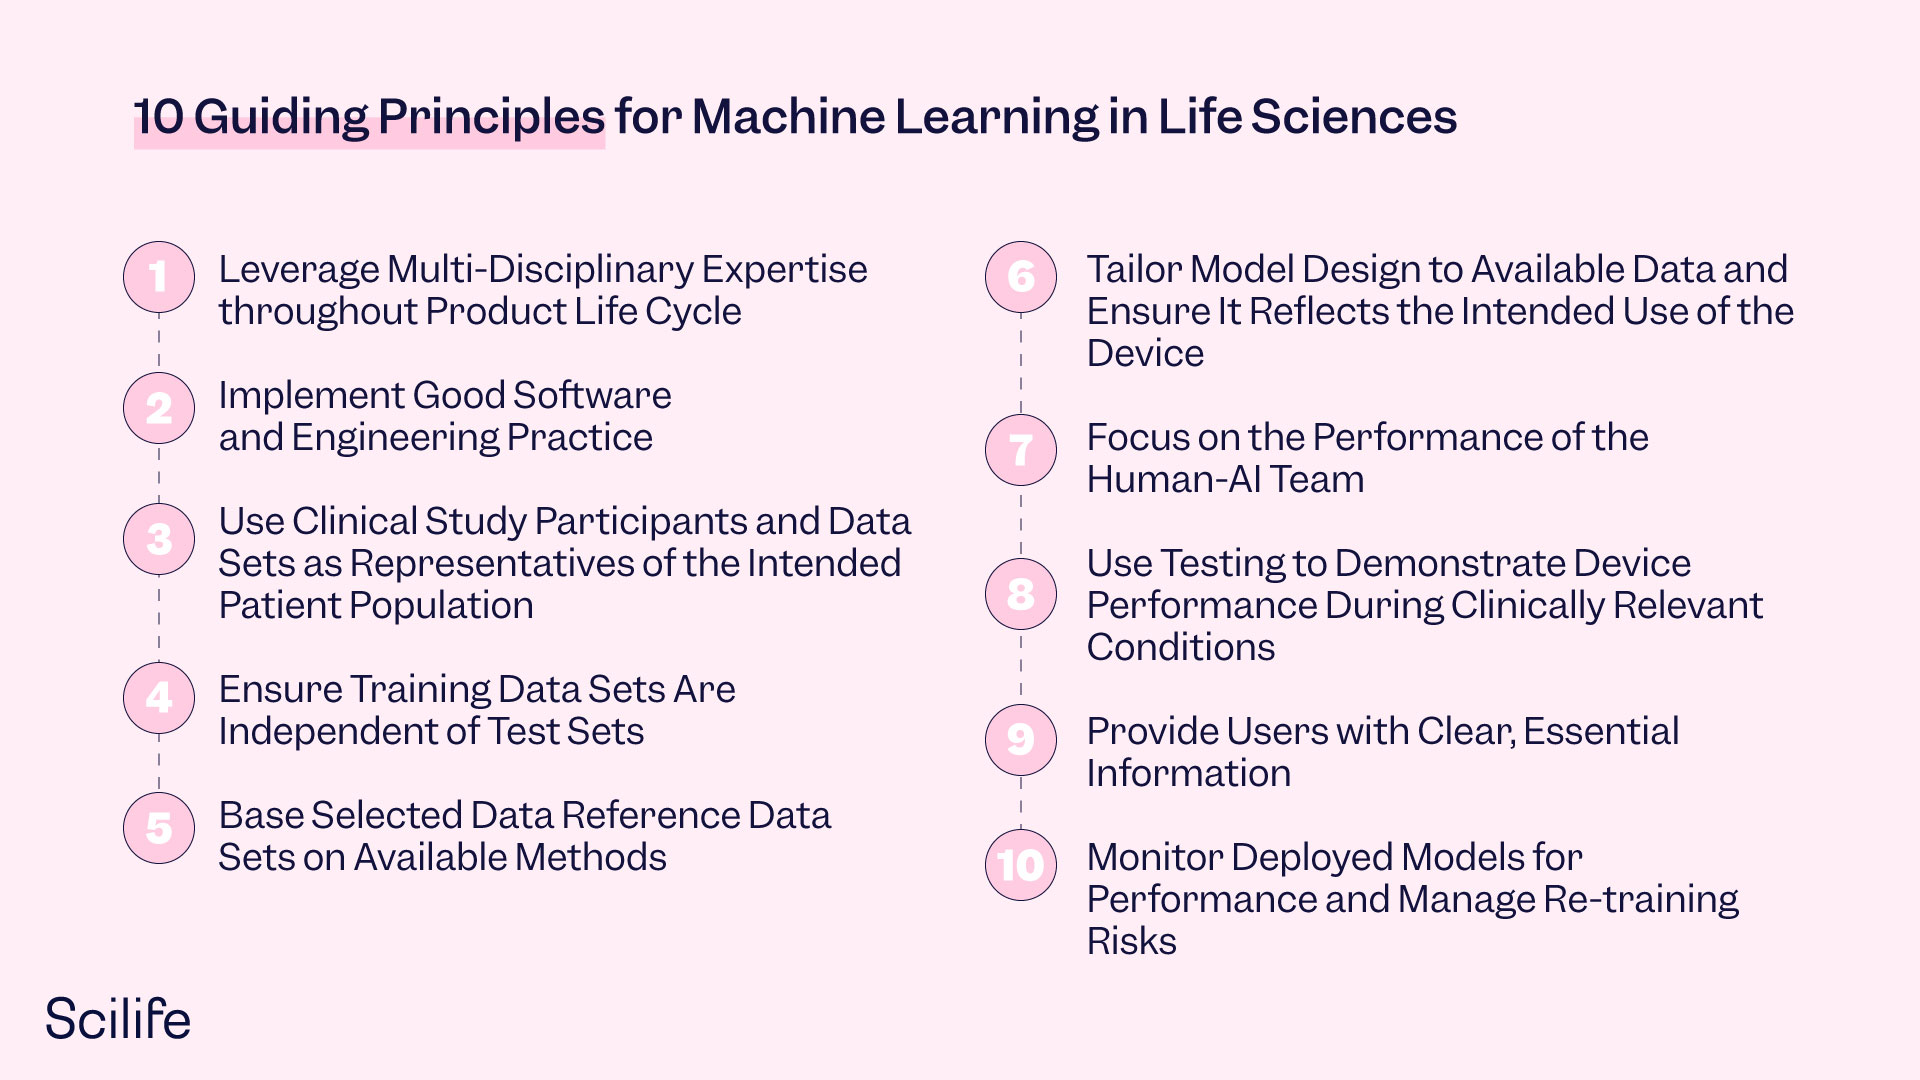 10 Guiding Principles for Machine Learning in Life Sciences | Scilife